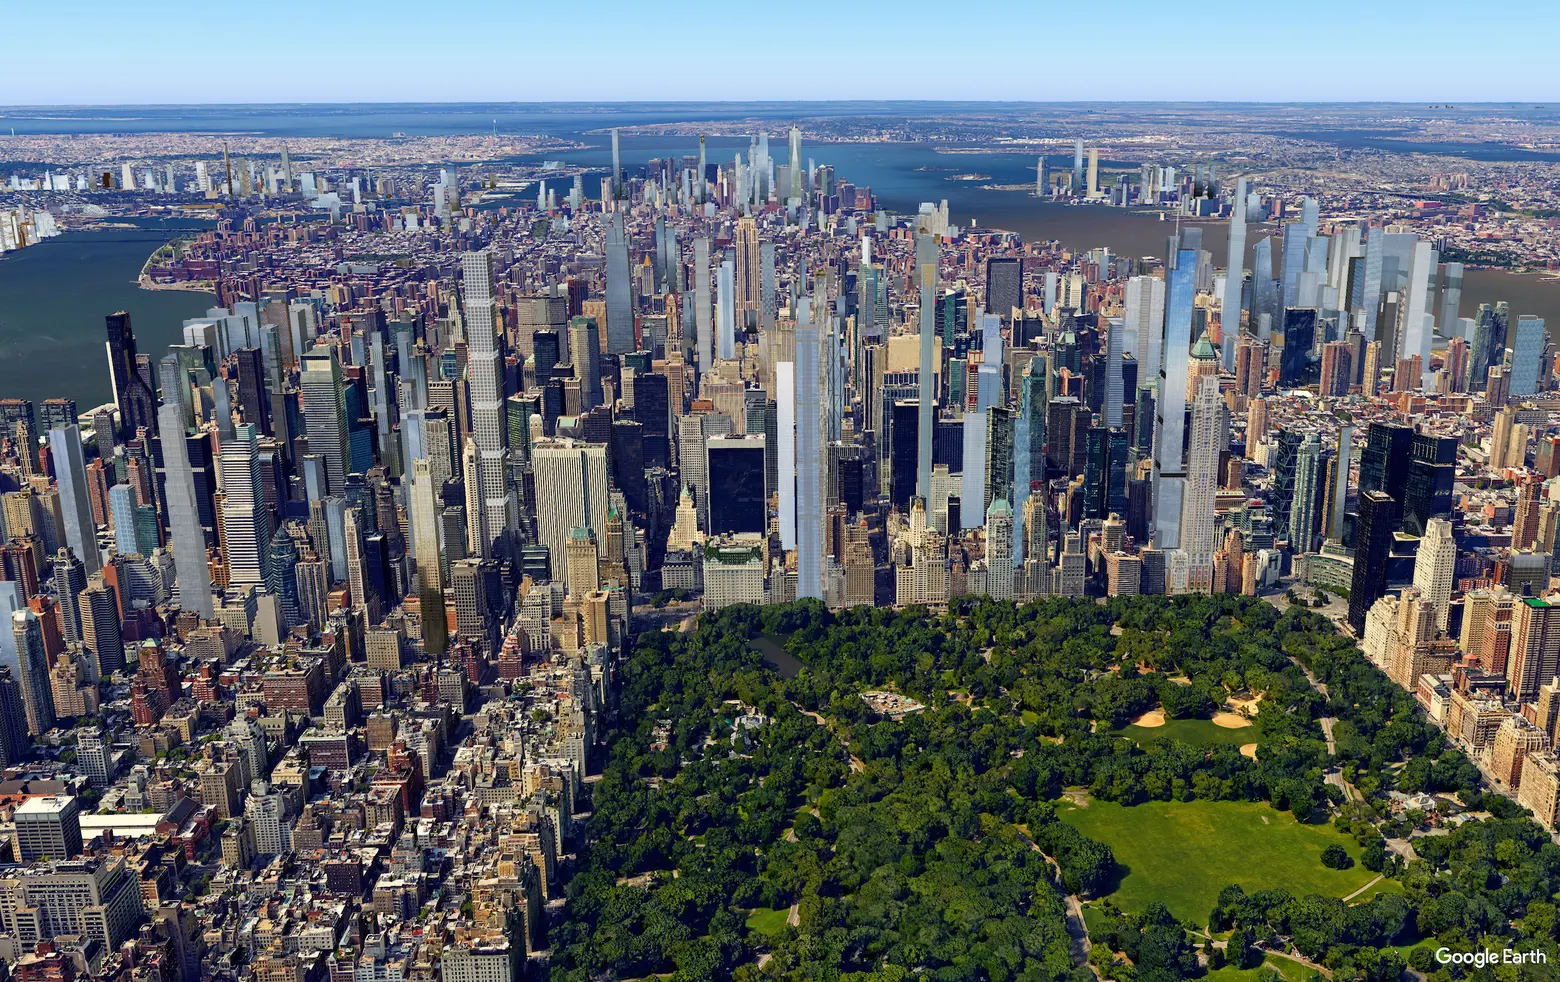 Check Out the Manhattan Skyline in 2020! New Development Sales to Hit $8.4B This Year